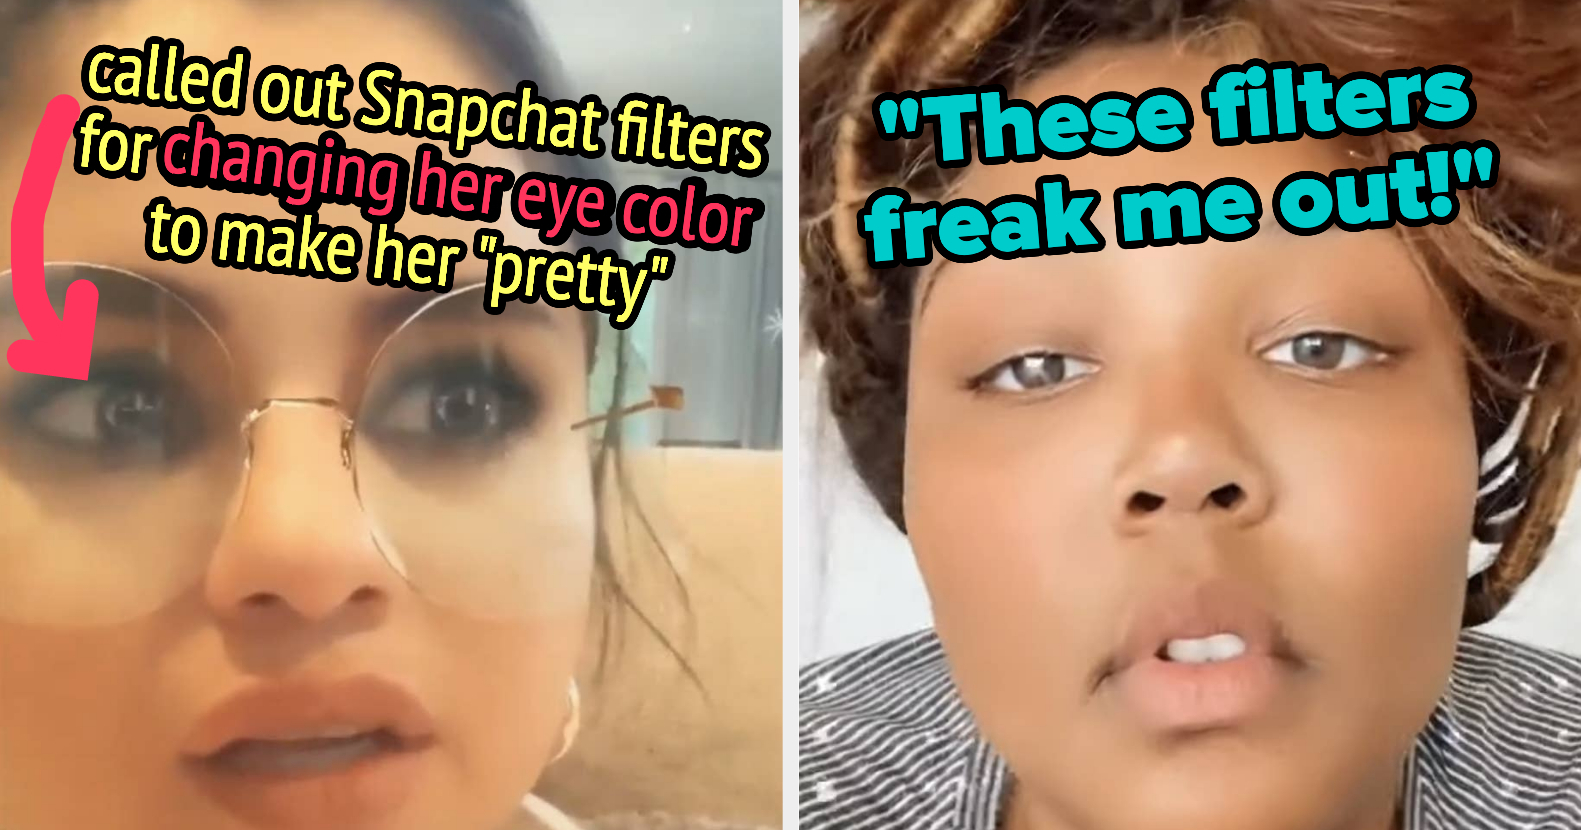 23 Times Famous People Spoke Out Against Filters And The Unattainable Beauty Standards They Create